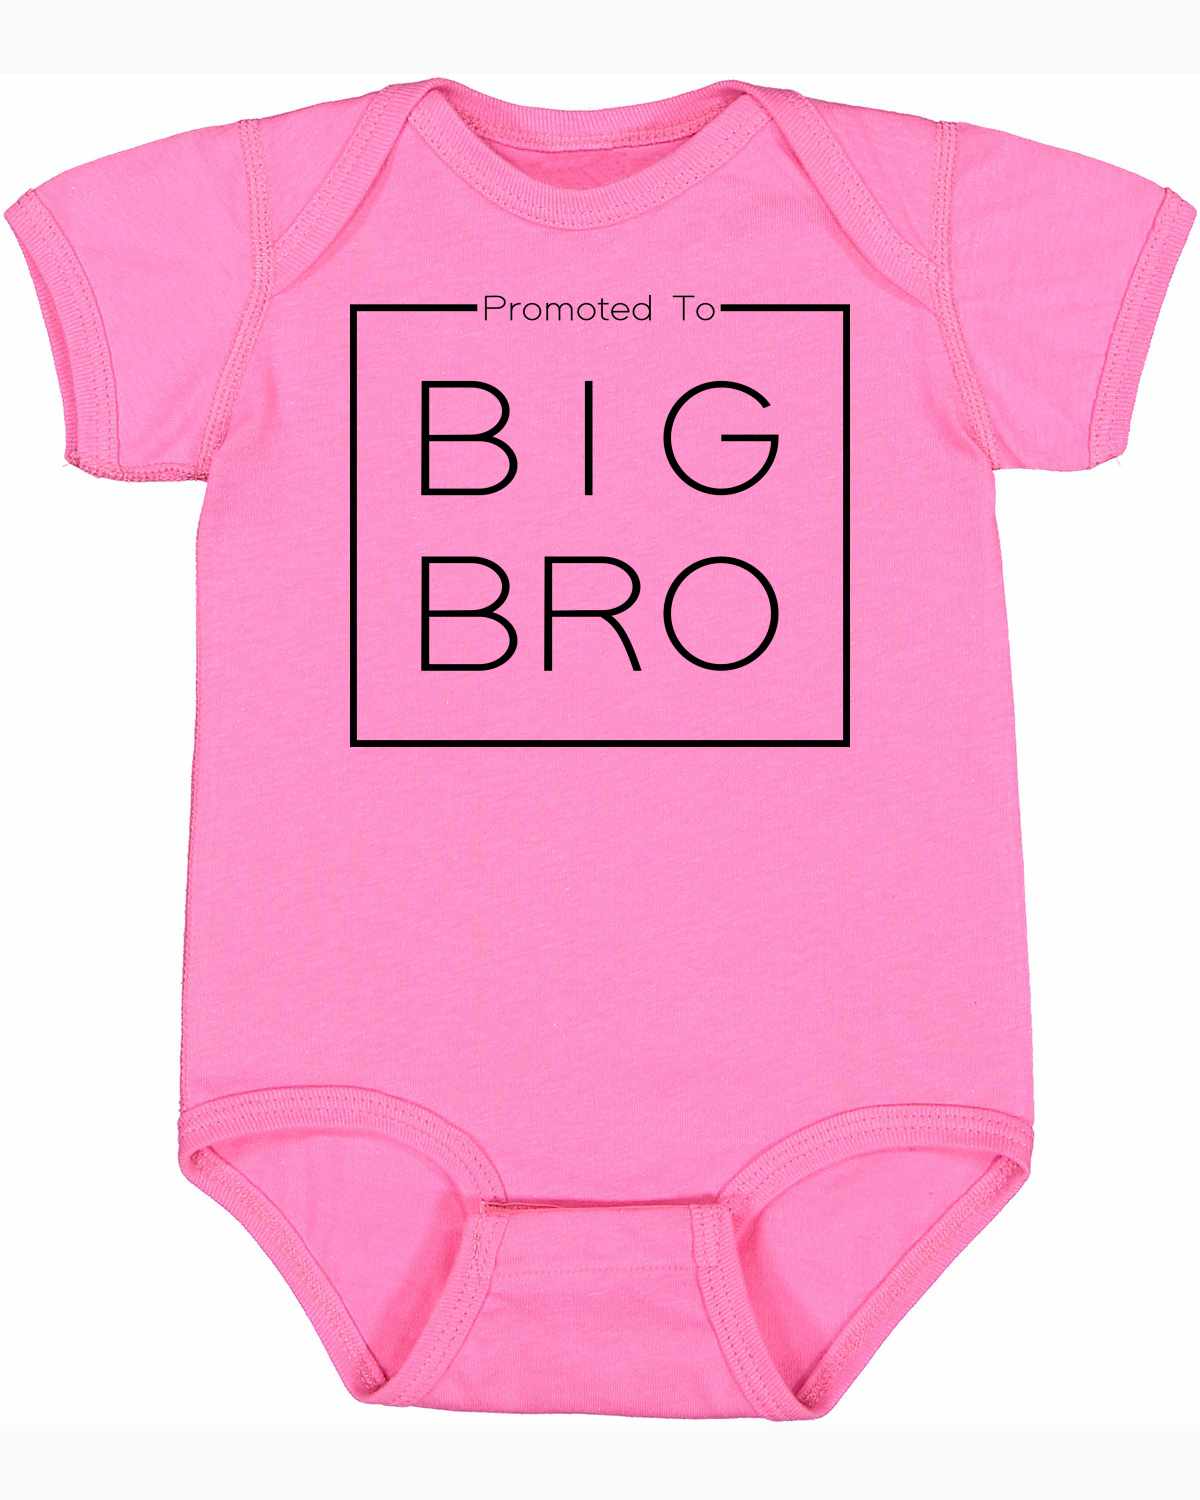 Promoted to Big Bro- Big Brother Box on Infant BodySuit (#1336-10)